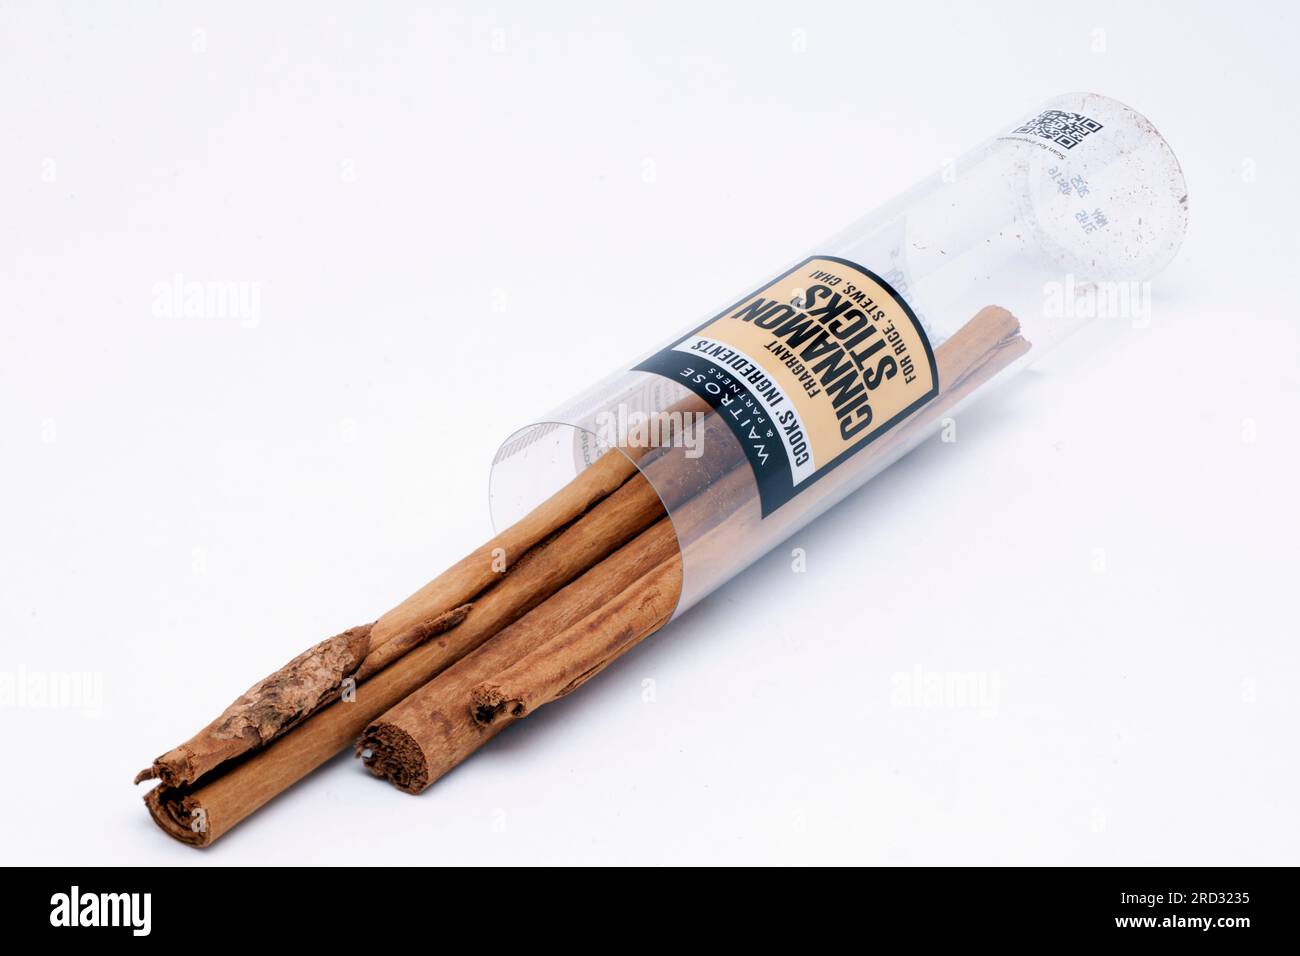 Tube of Cooks Ingredients Dried Cinnamon Sticks Spilling from Container Stock Photo